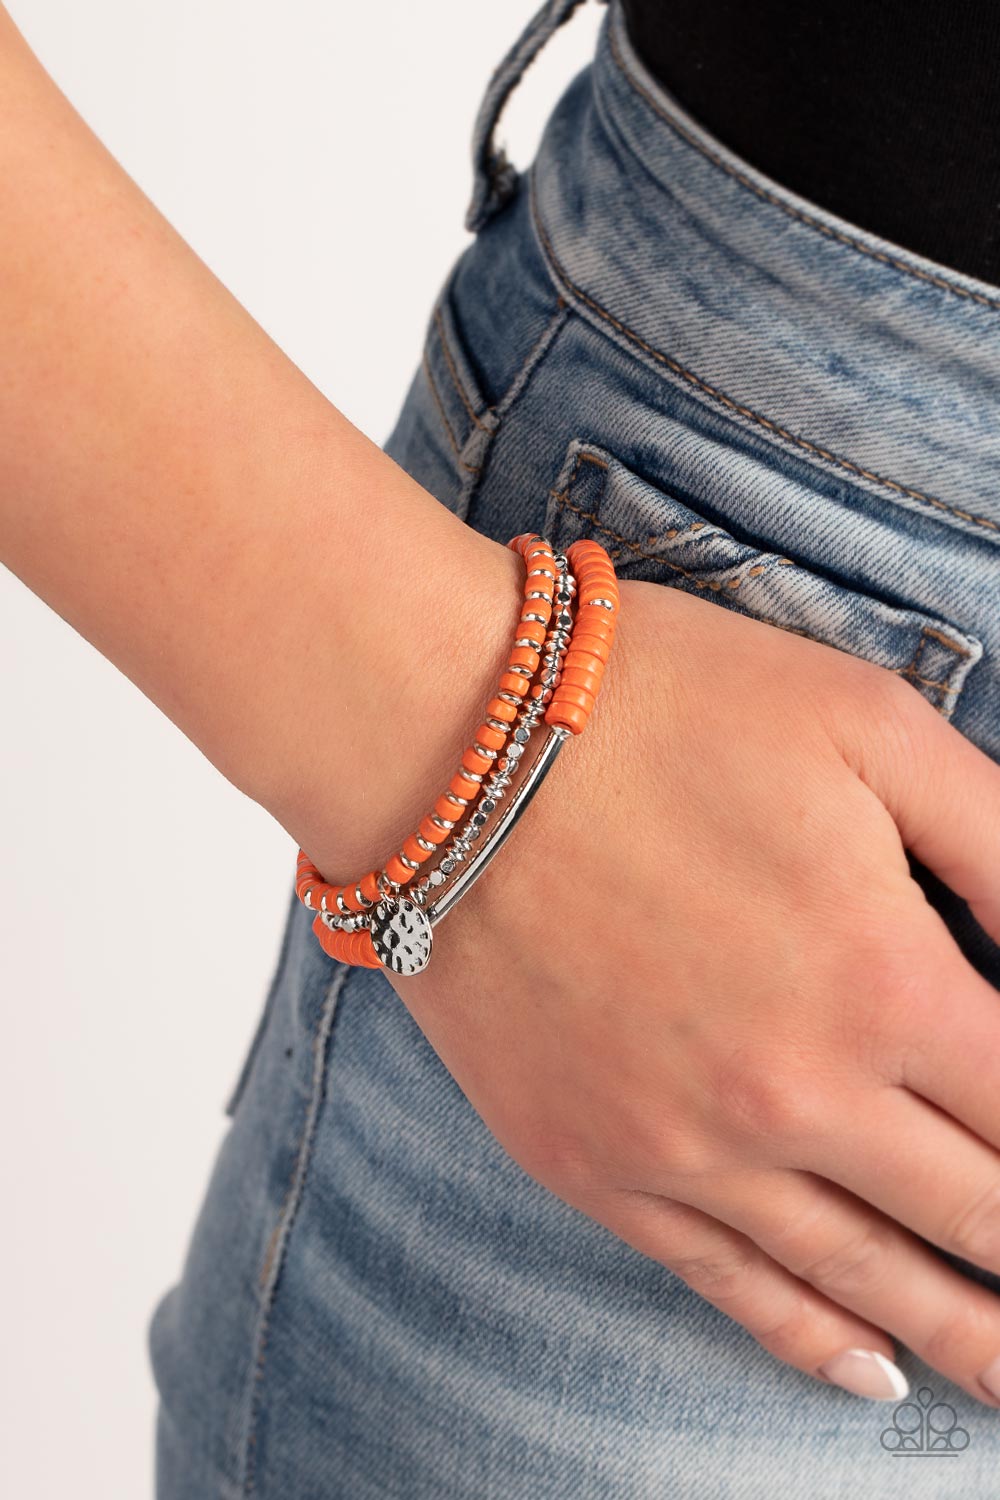 Paparazzi Accessories Terraform Trendsetter - Orange A collection of shiny silver square and oval beads, refreshing orange stone discs, a hammered silver disc, and a curved silver cylinder, are threaded along stretchy bands, making three distinctive desig